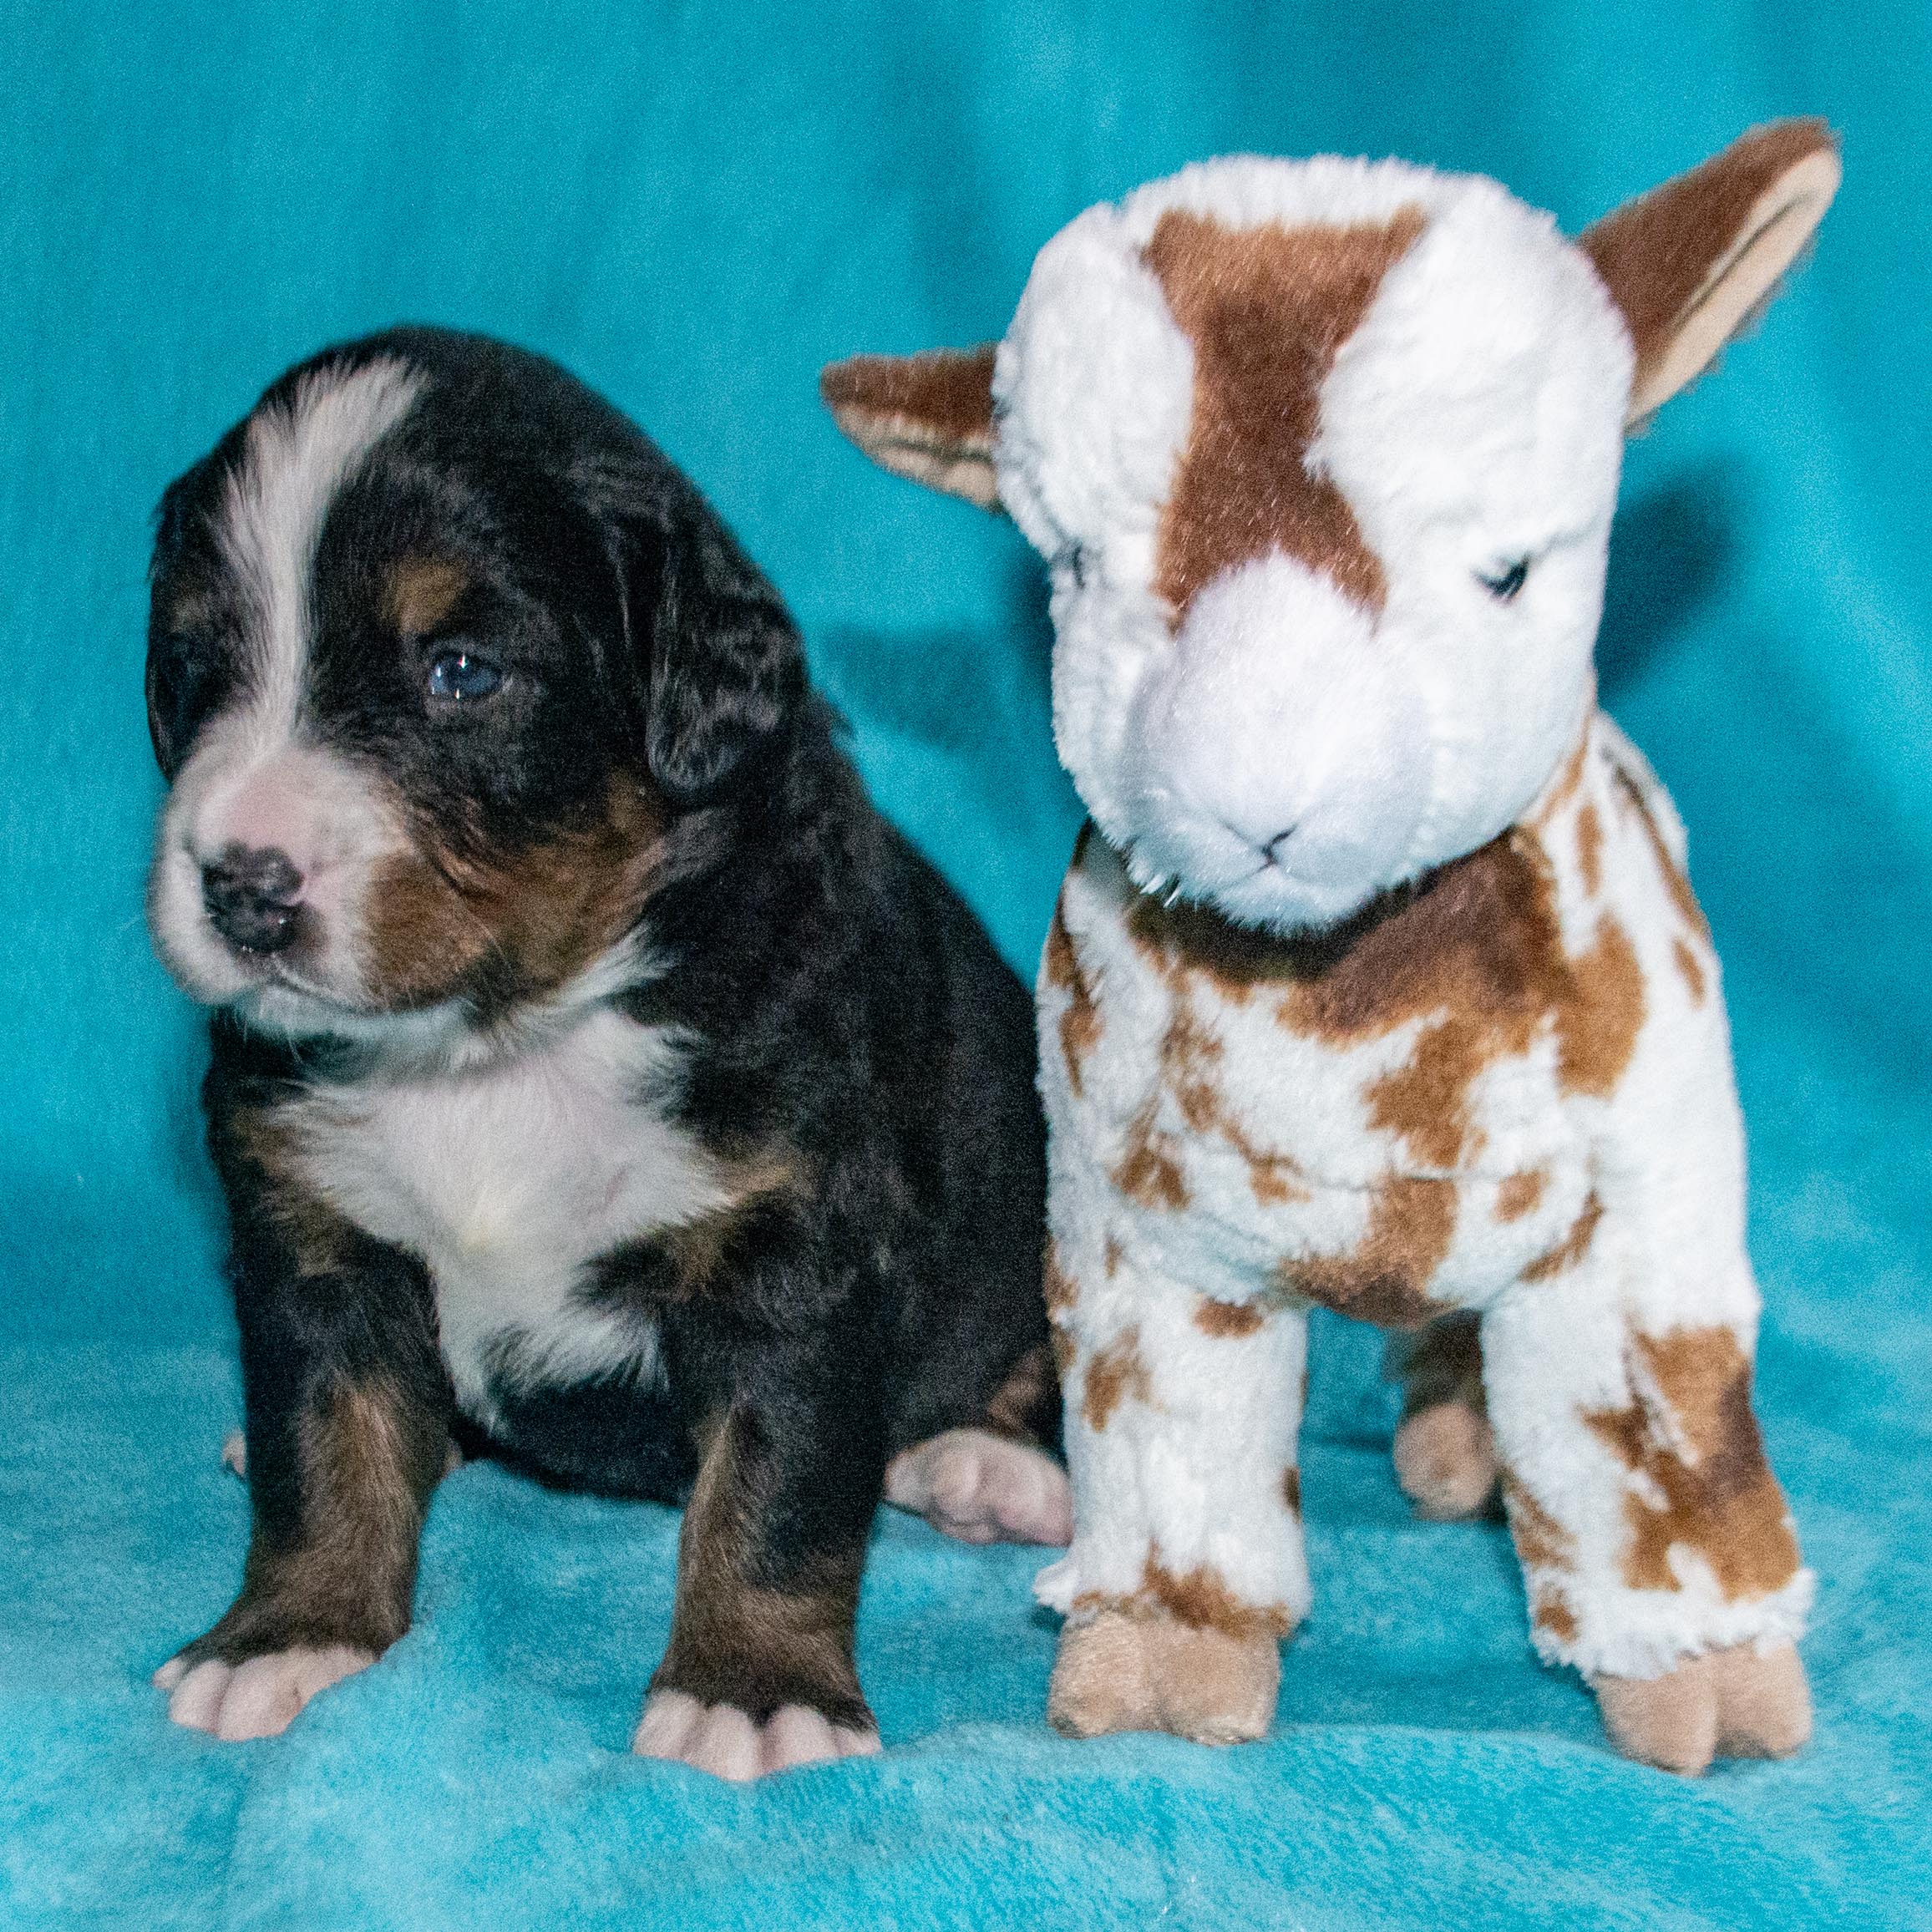 Morgana the female Bernese Mountain Dog Puppy Camelot January With Stuffed Animal Baby Goat Toy